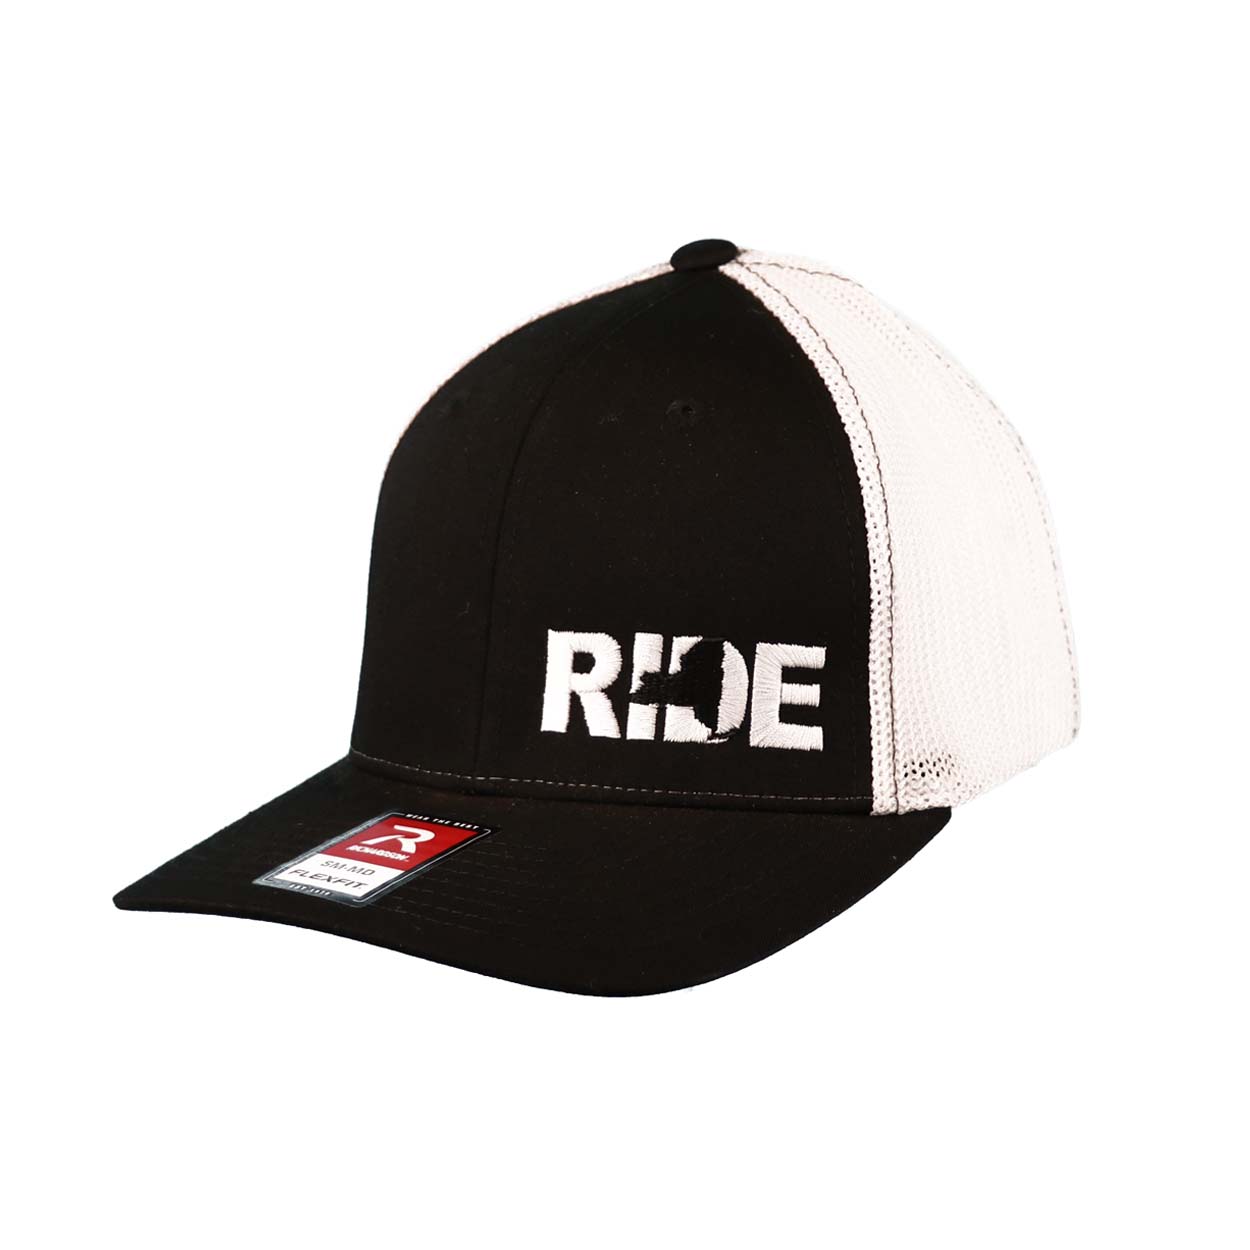 Ride New York Night Out Embroidered Flex Fit Hat Black/White